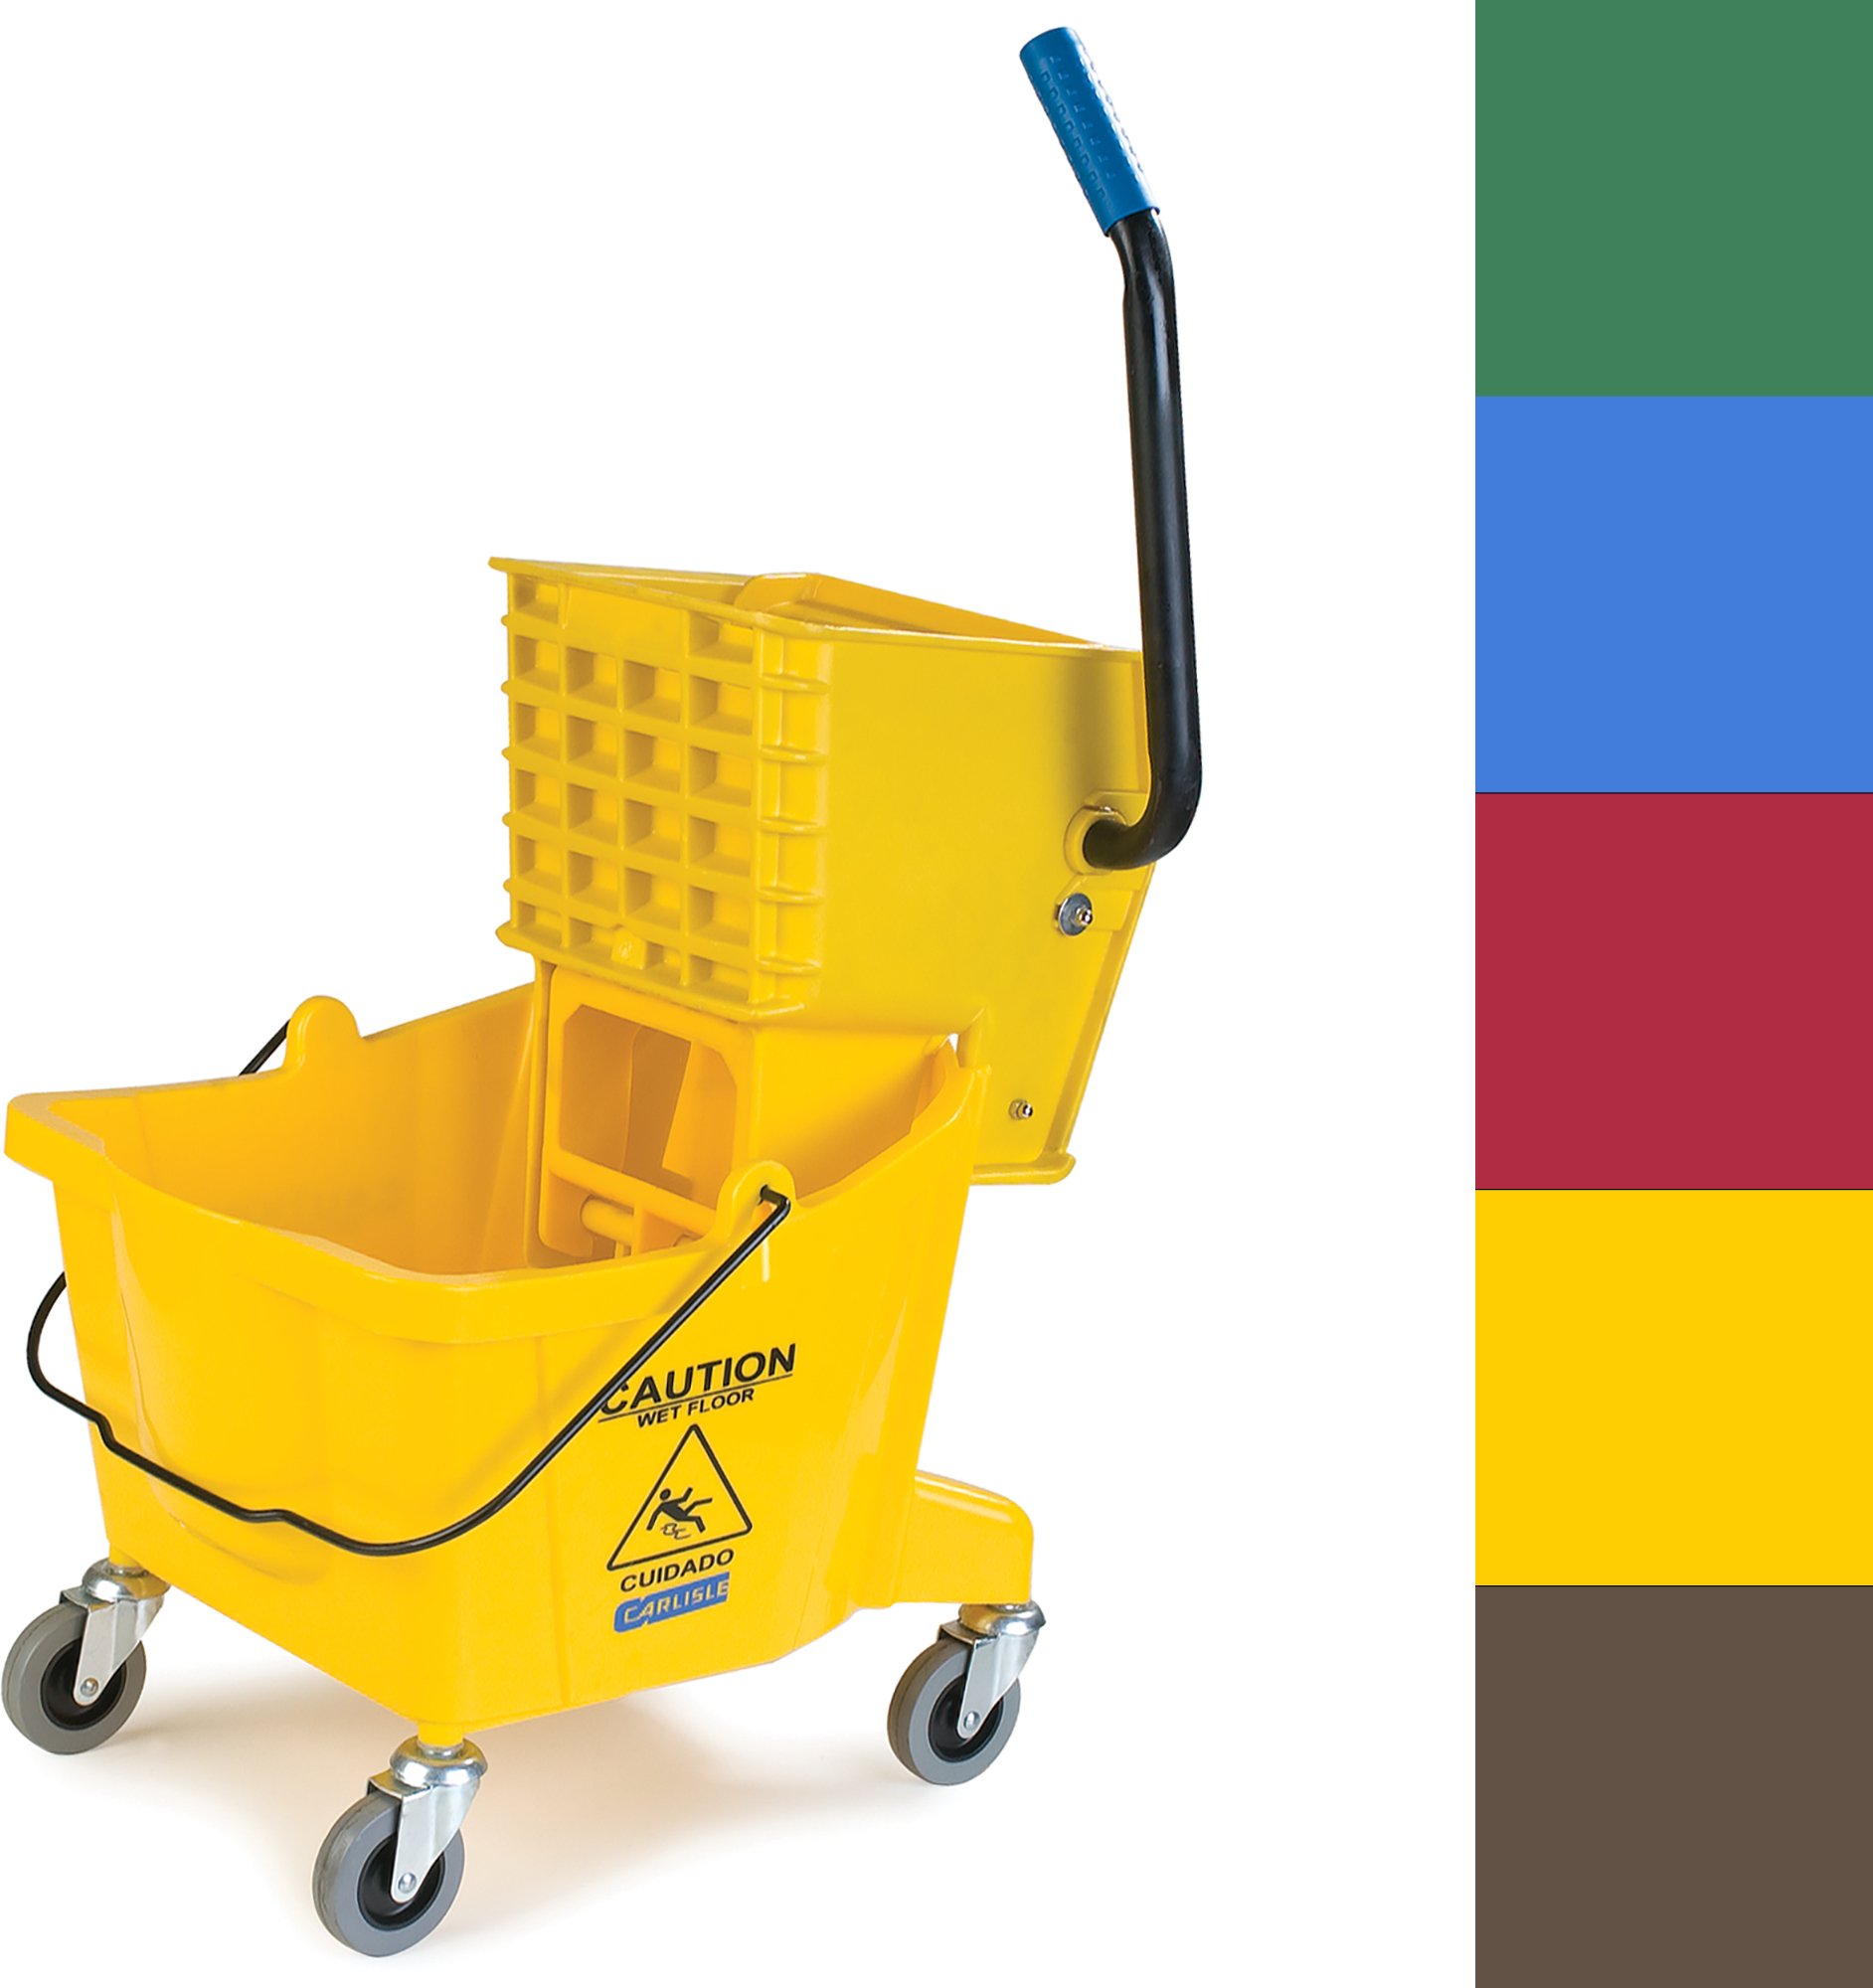 Carlisle FoodService Products Plastic Commercial Mop Bucket with Side-Press Wringer, 26 Quarts, Yellow